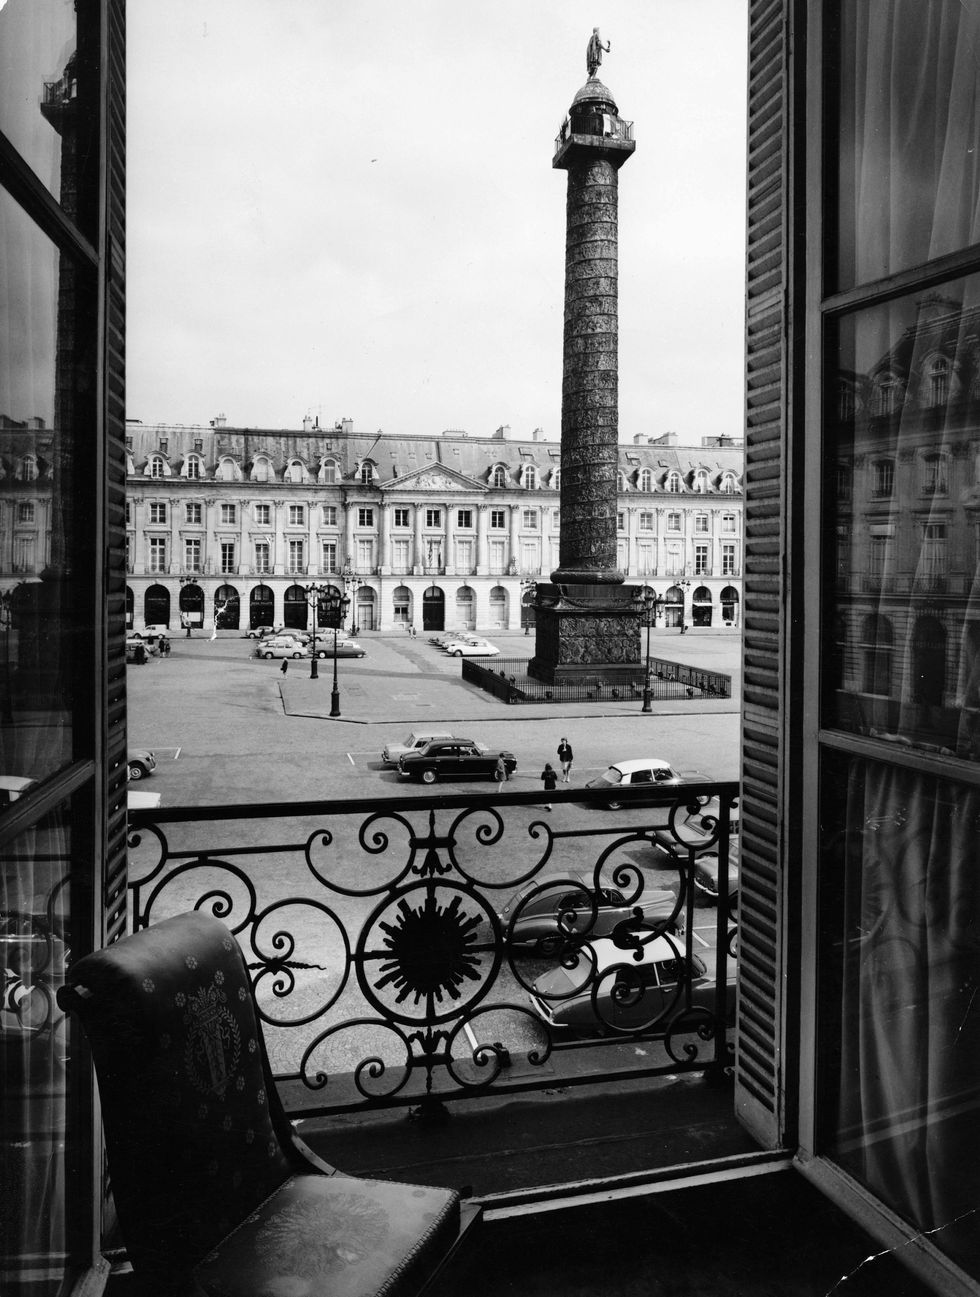 The Ritz Hotel in Paris, France Editorial Photo - Image of famous, city:  85565826